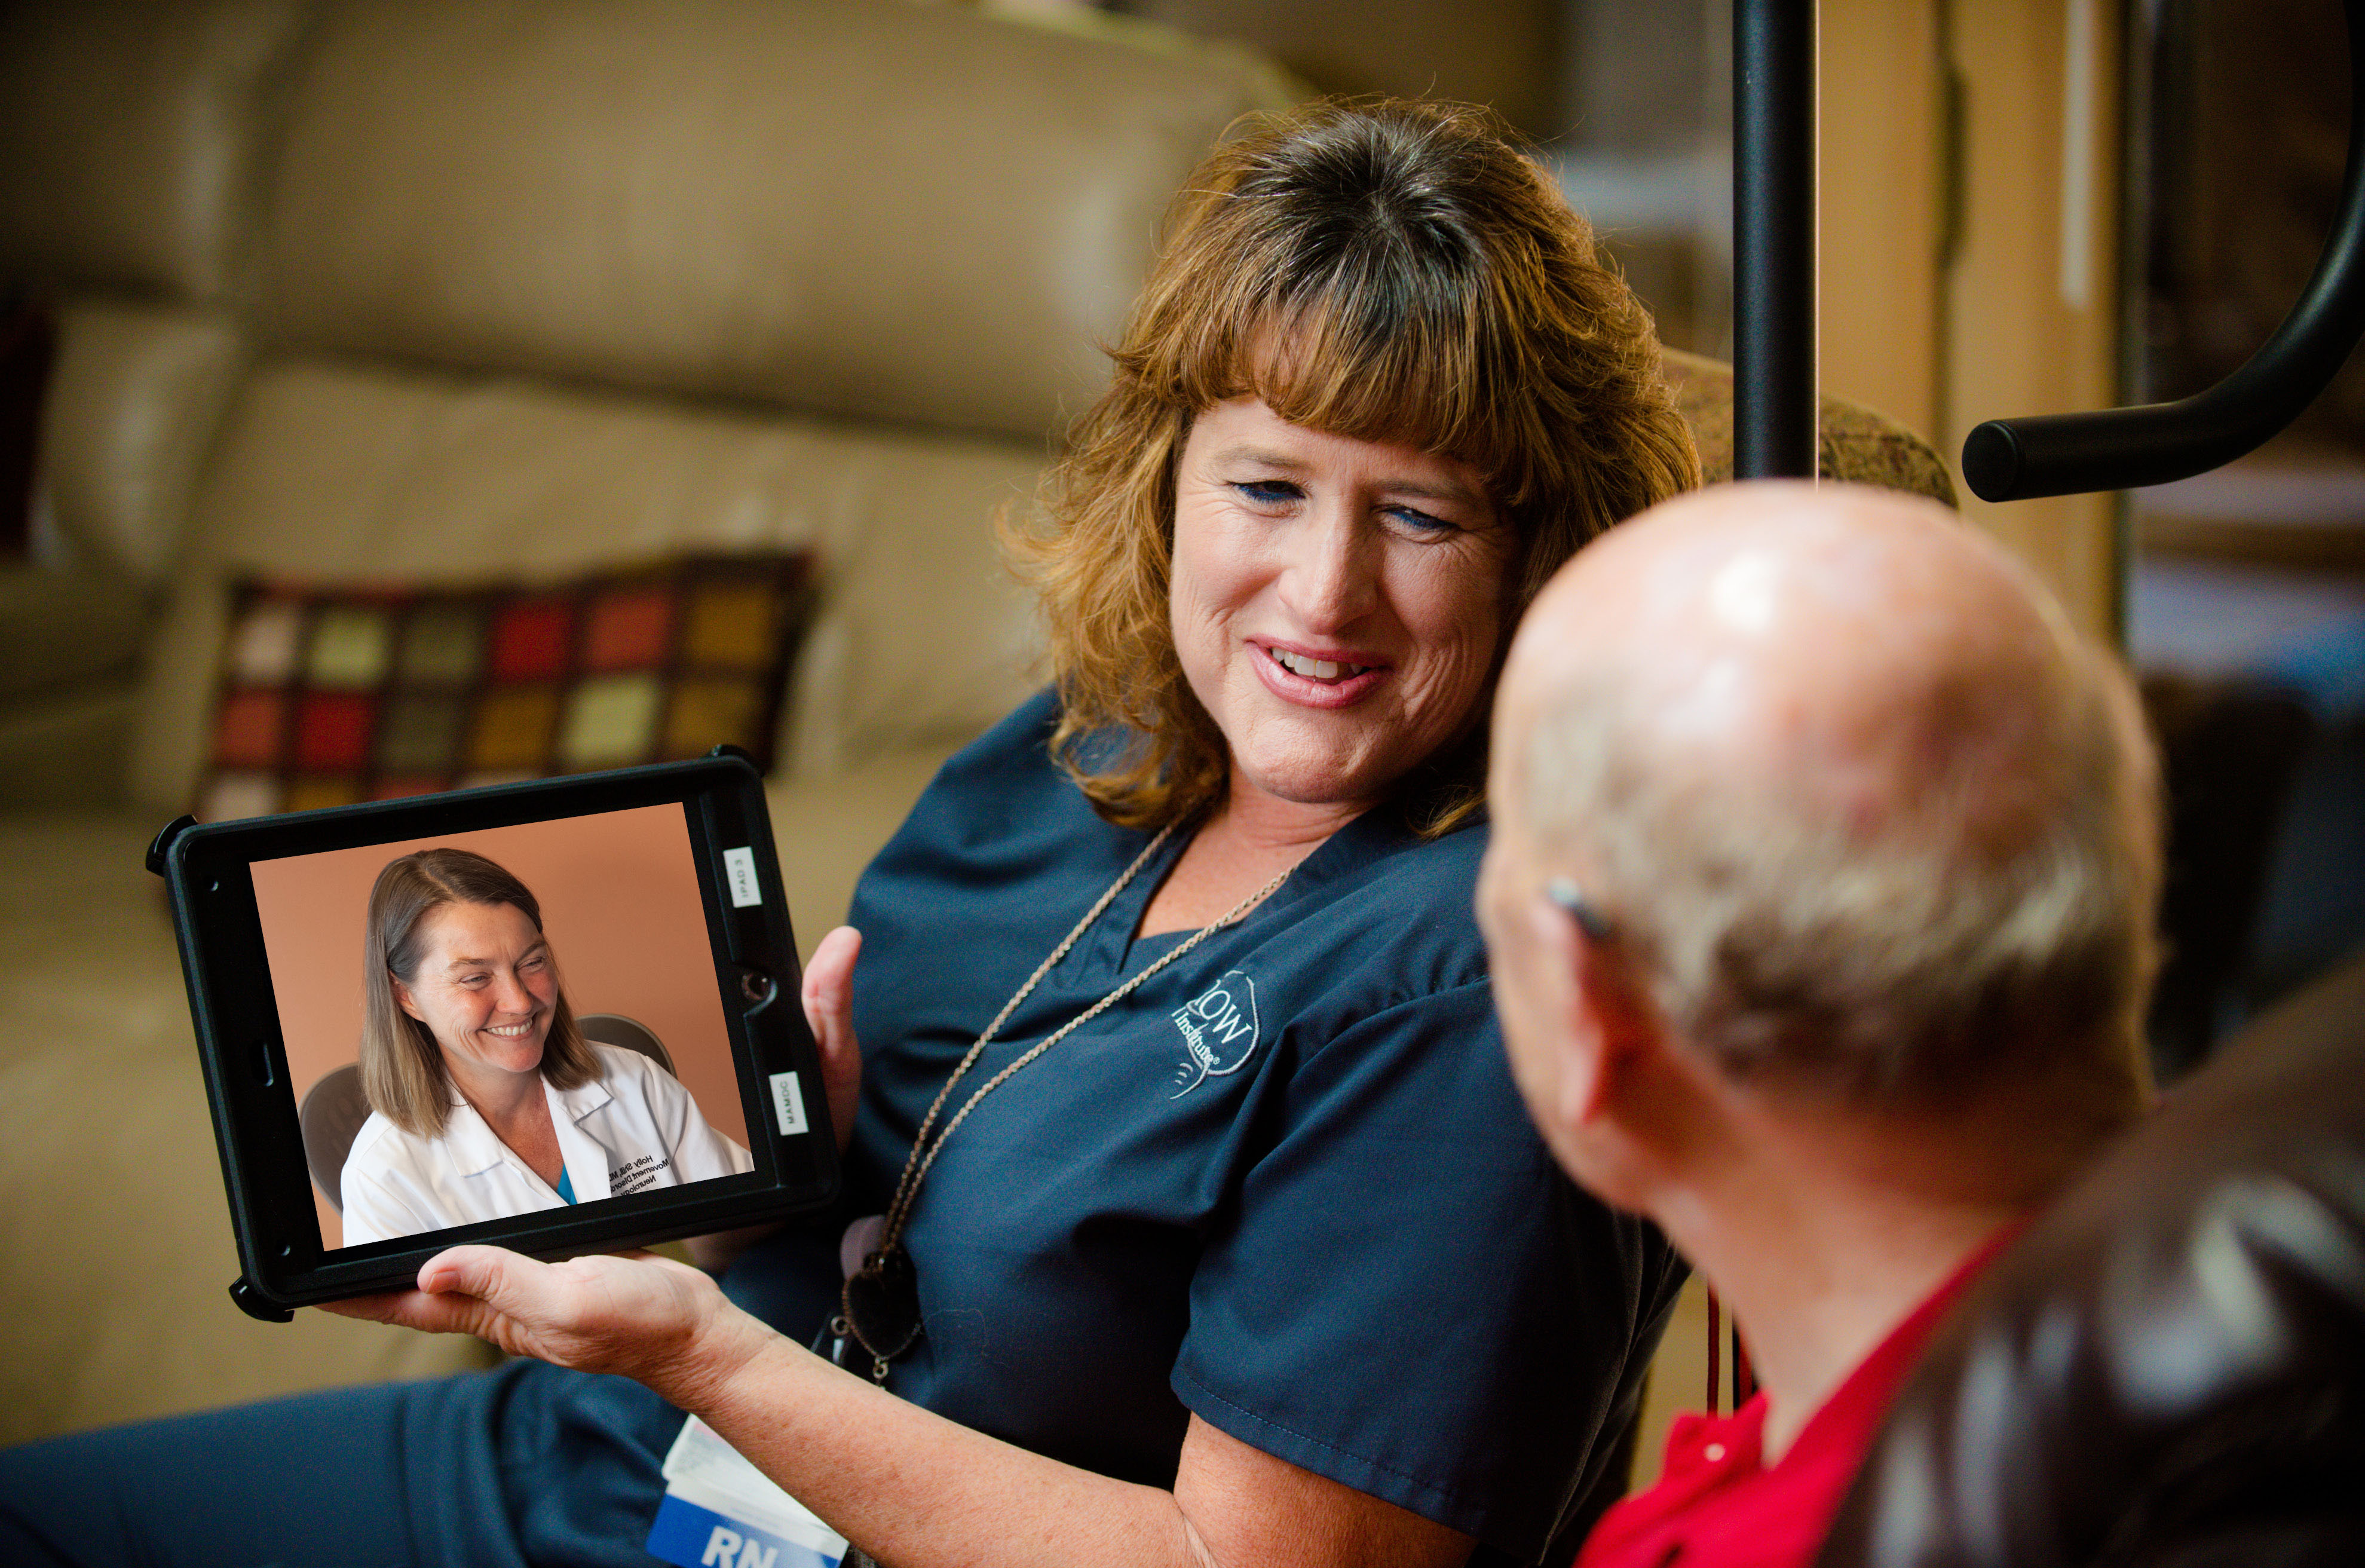 Barrow physicians will be able to check in on homebound patients and adjust their care plans via video chats